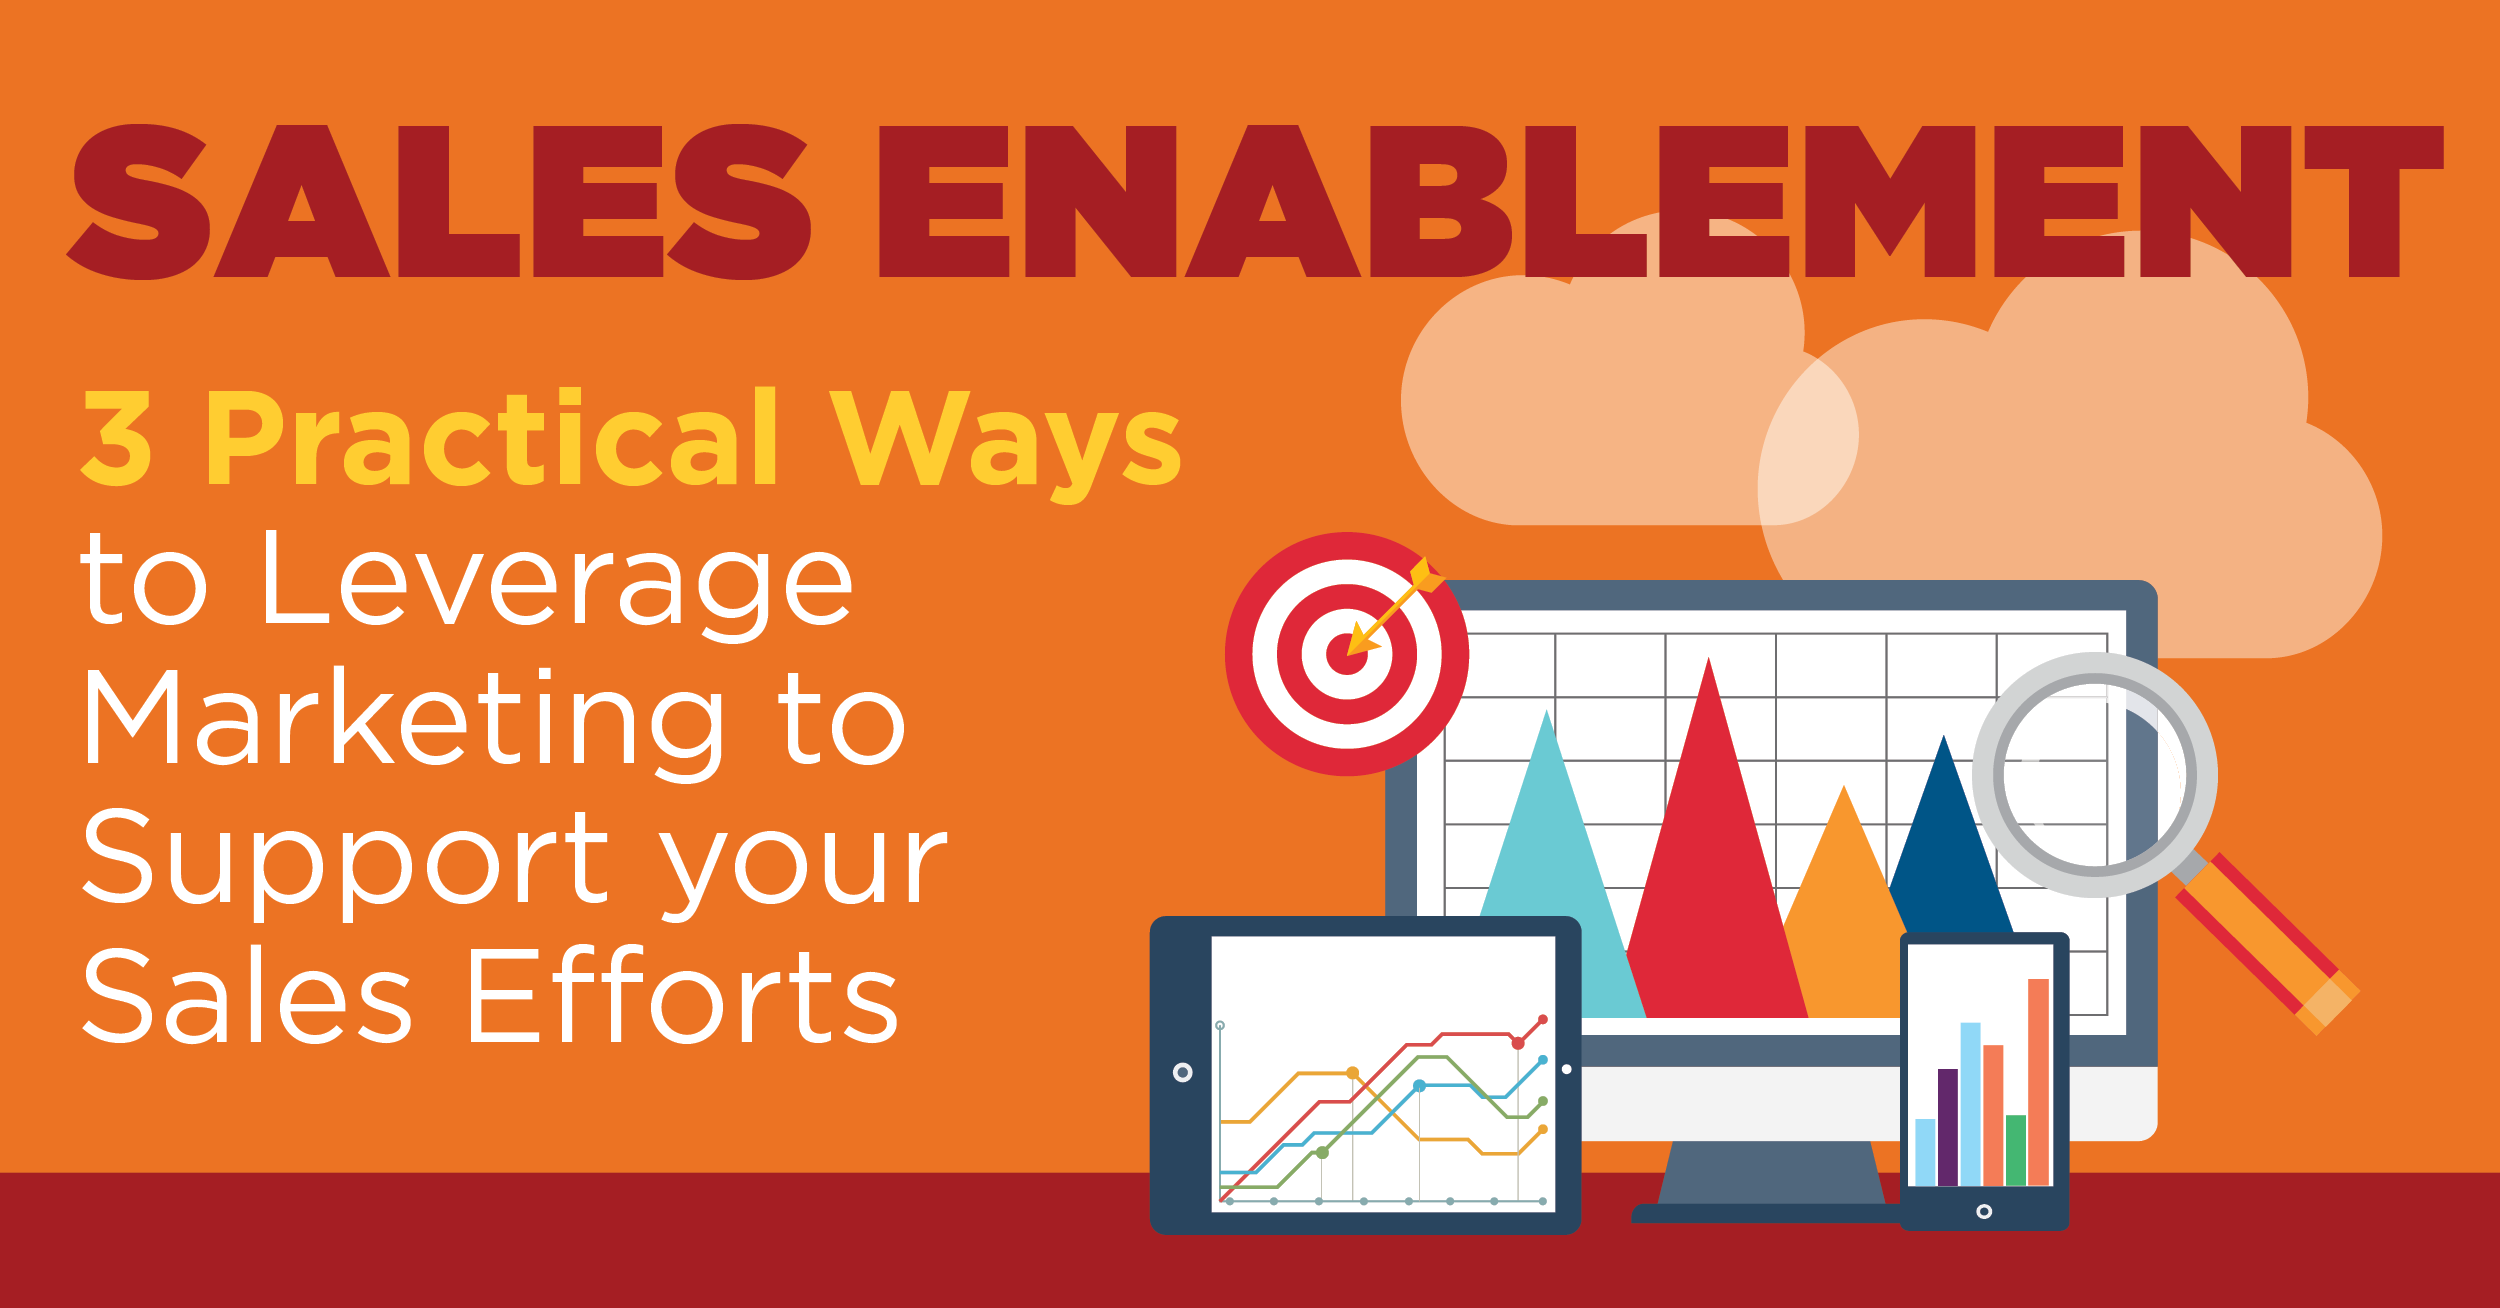 Sales Enablement Marketing: 3 Practical Ways to Leverage Marketing to Support your Sales Efforts